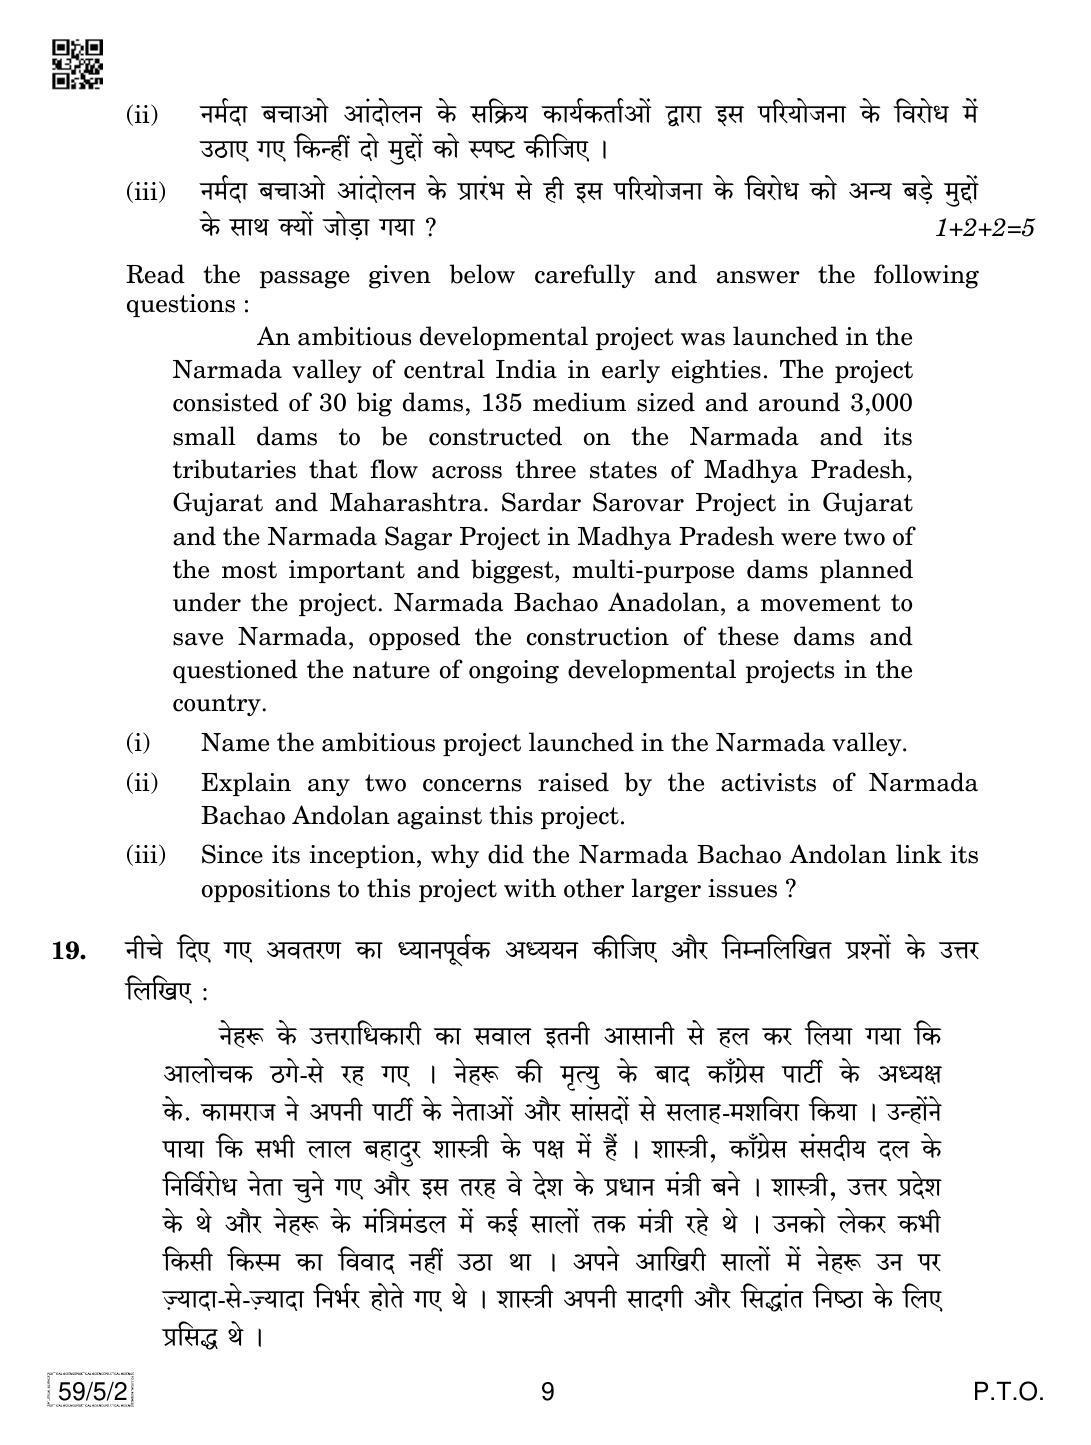 CBSE Class 12 59-5-2 Political Science 2019 Question Paper - Page 9